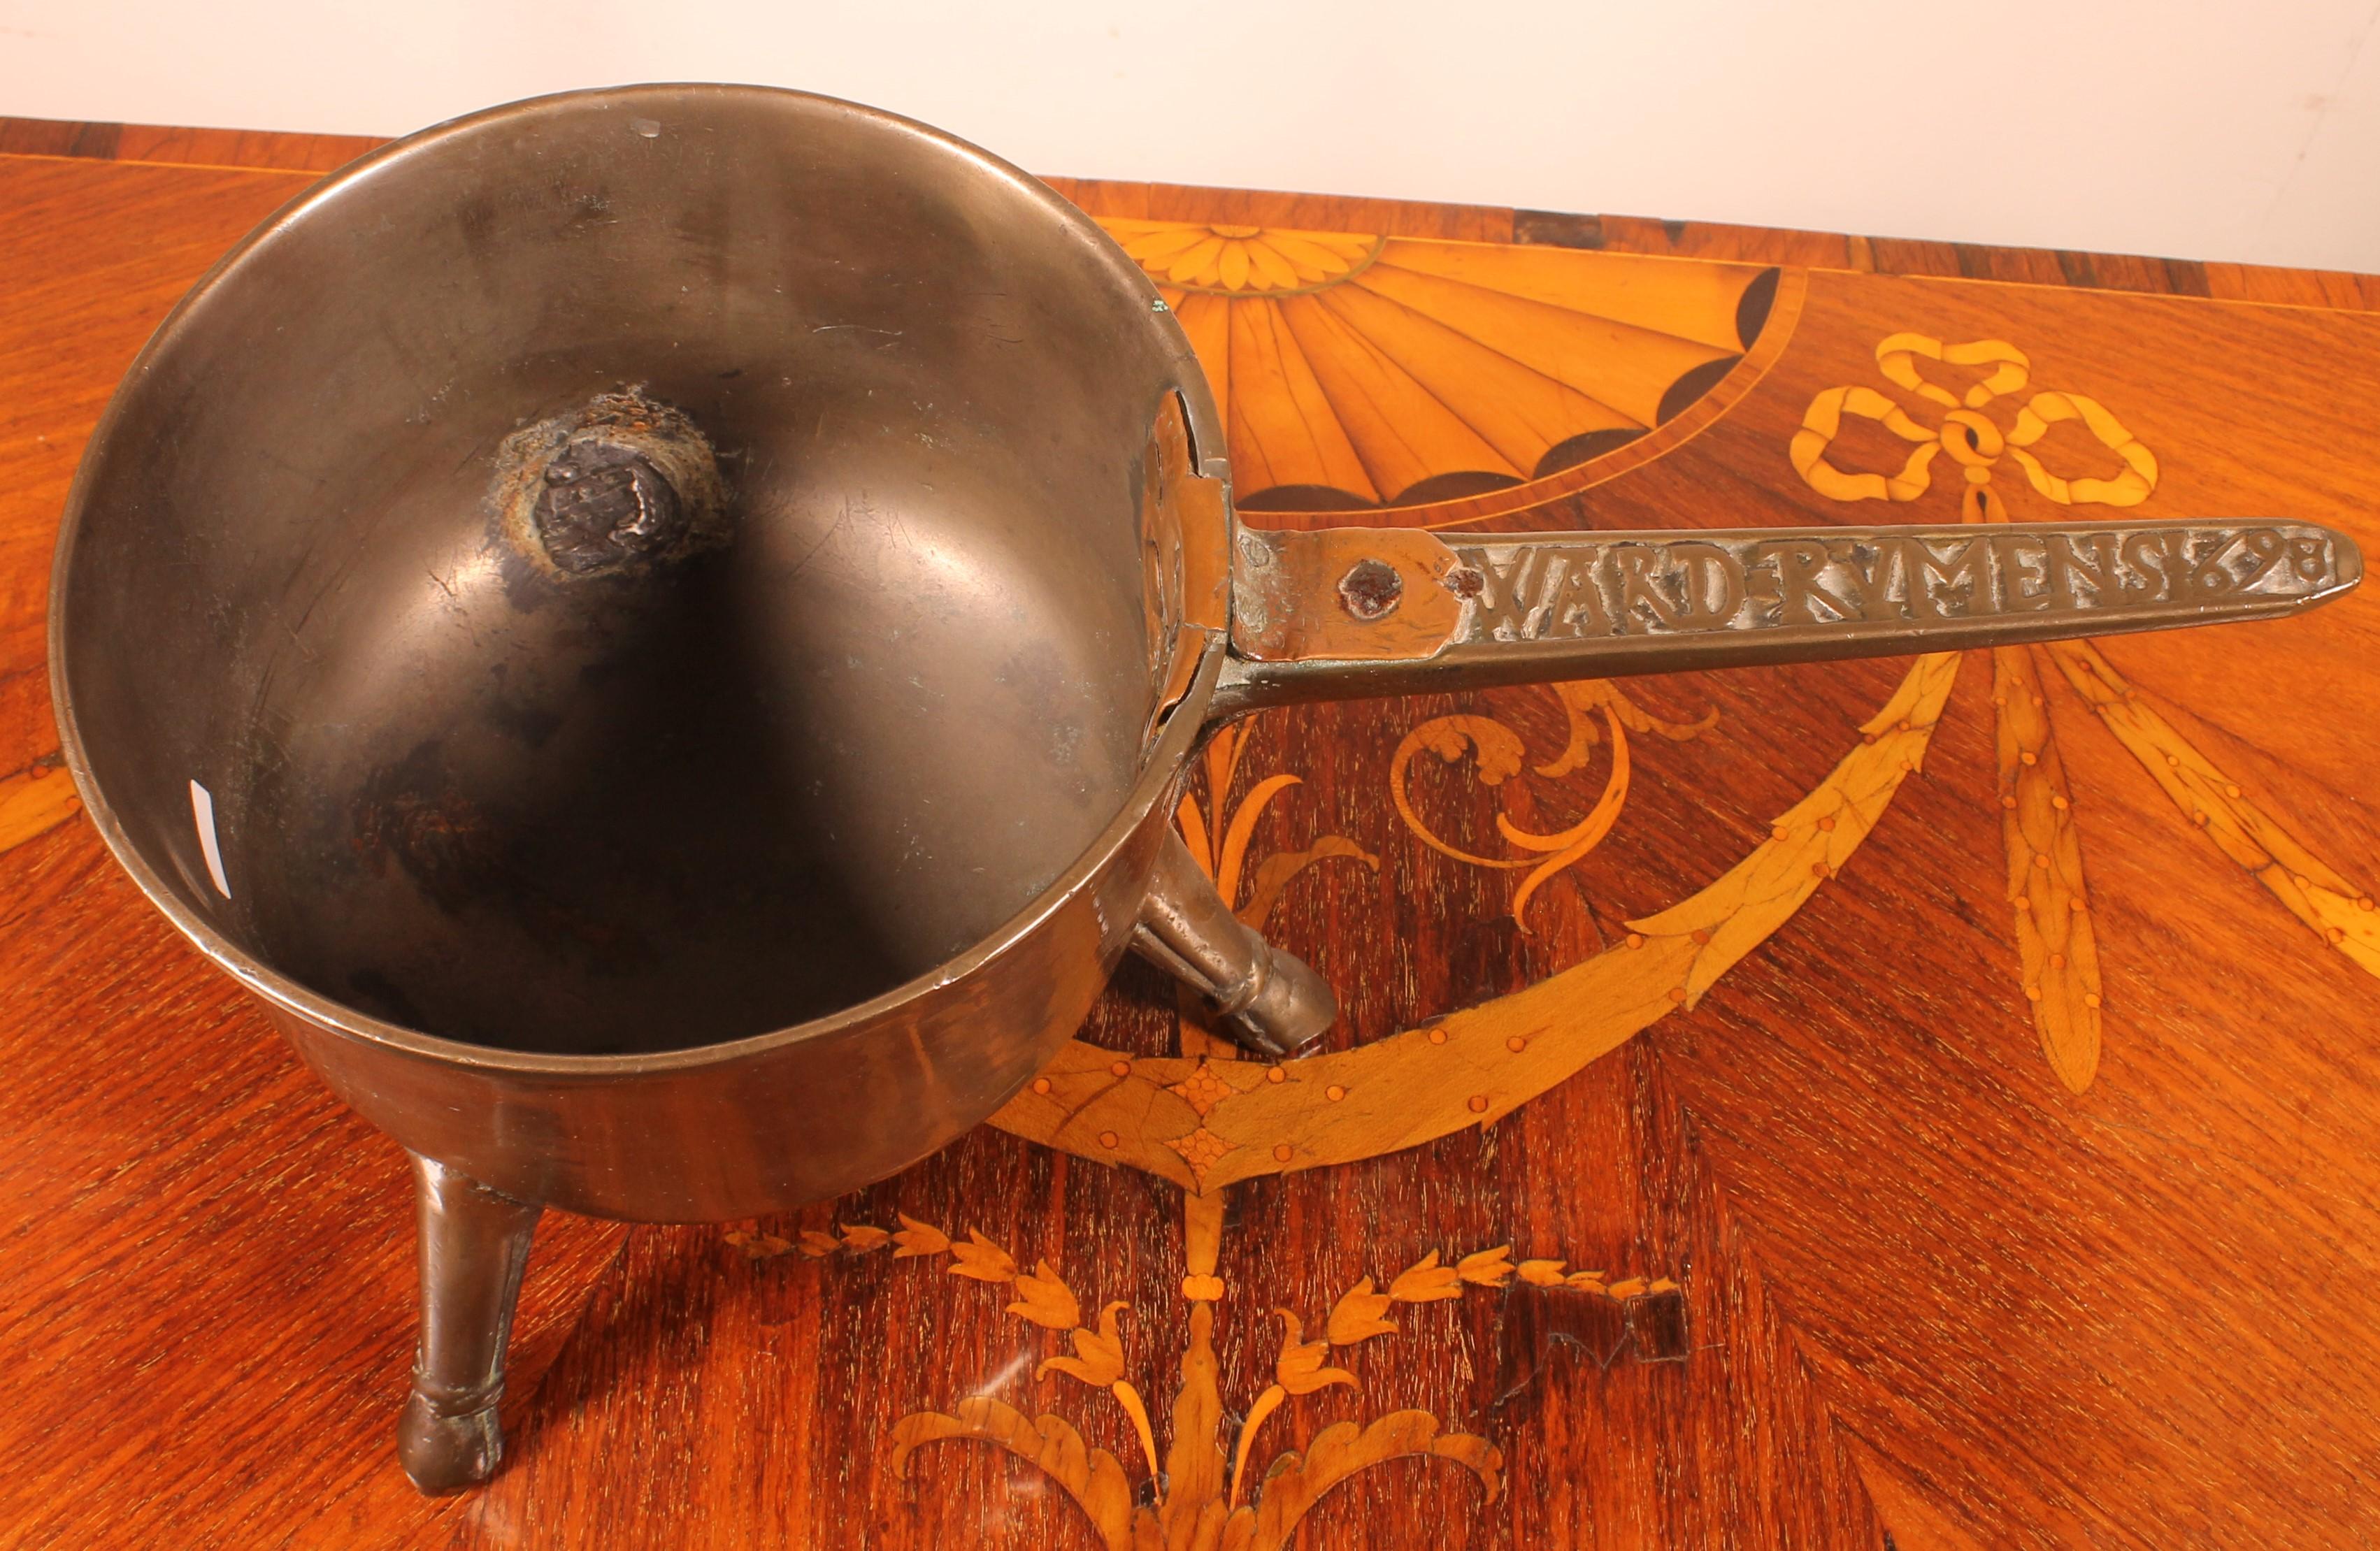 18th Century and Earlier 17th Century Tripod Apothecary Skillet Dated 1698 from The Ward Rvmens Family For Sale